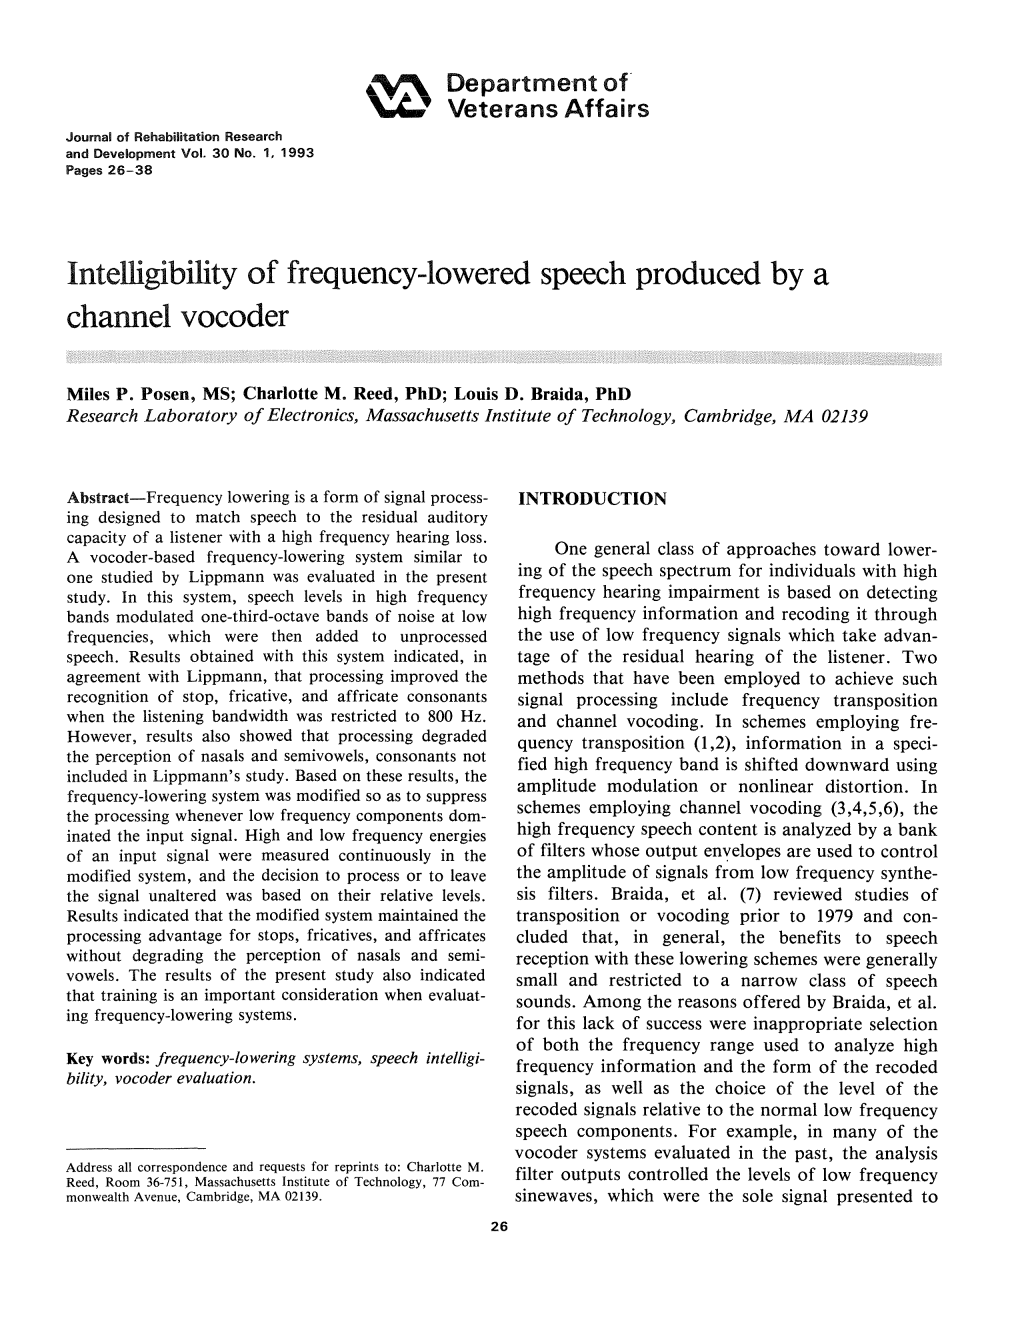 Intelligibility of Frequency-Lowered Speech Produced by a Channel Vocoder